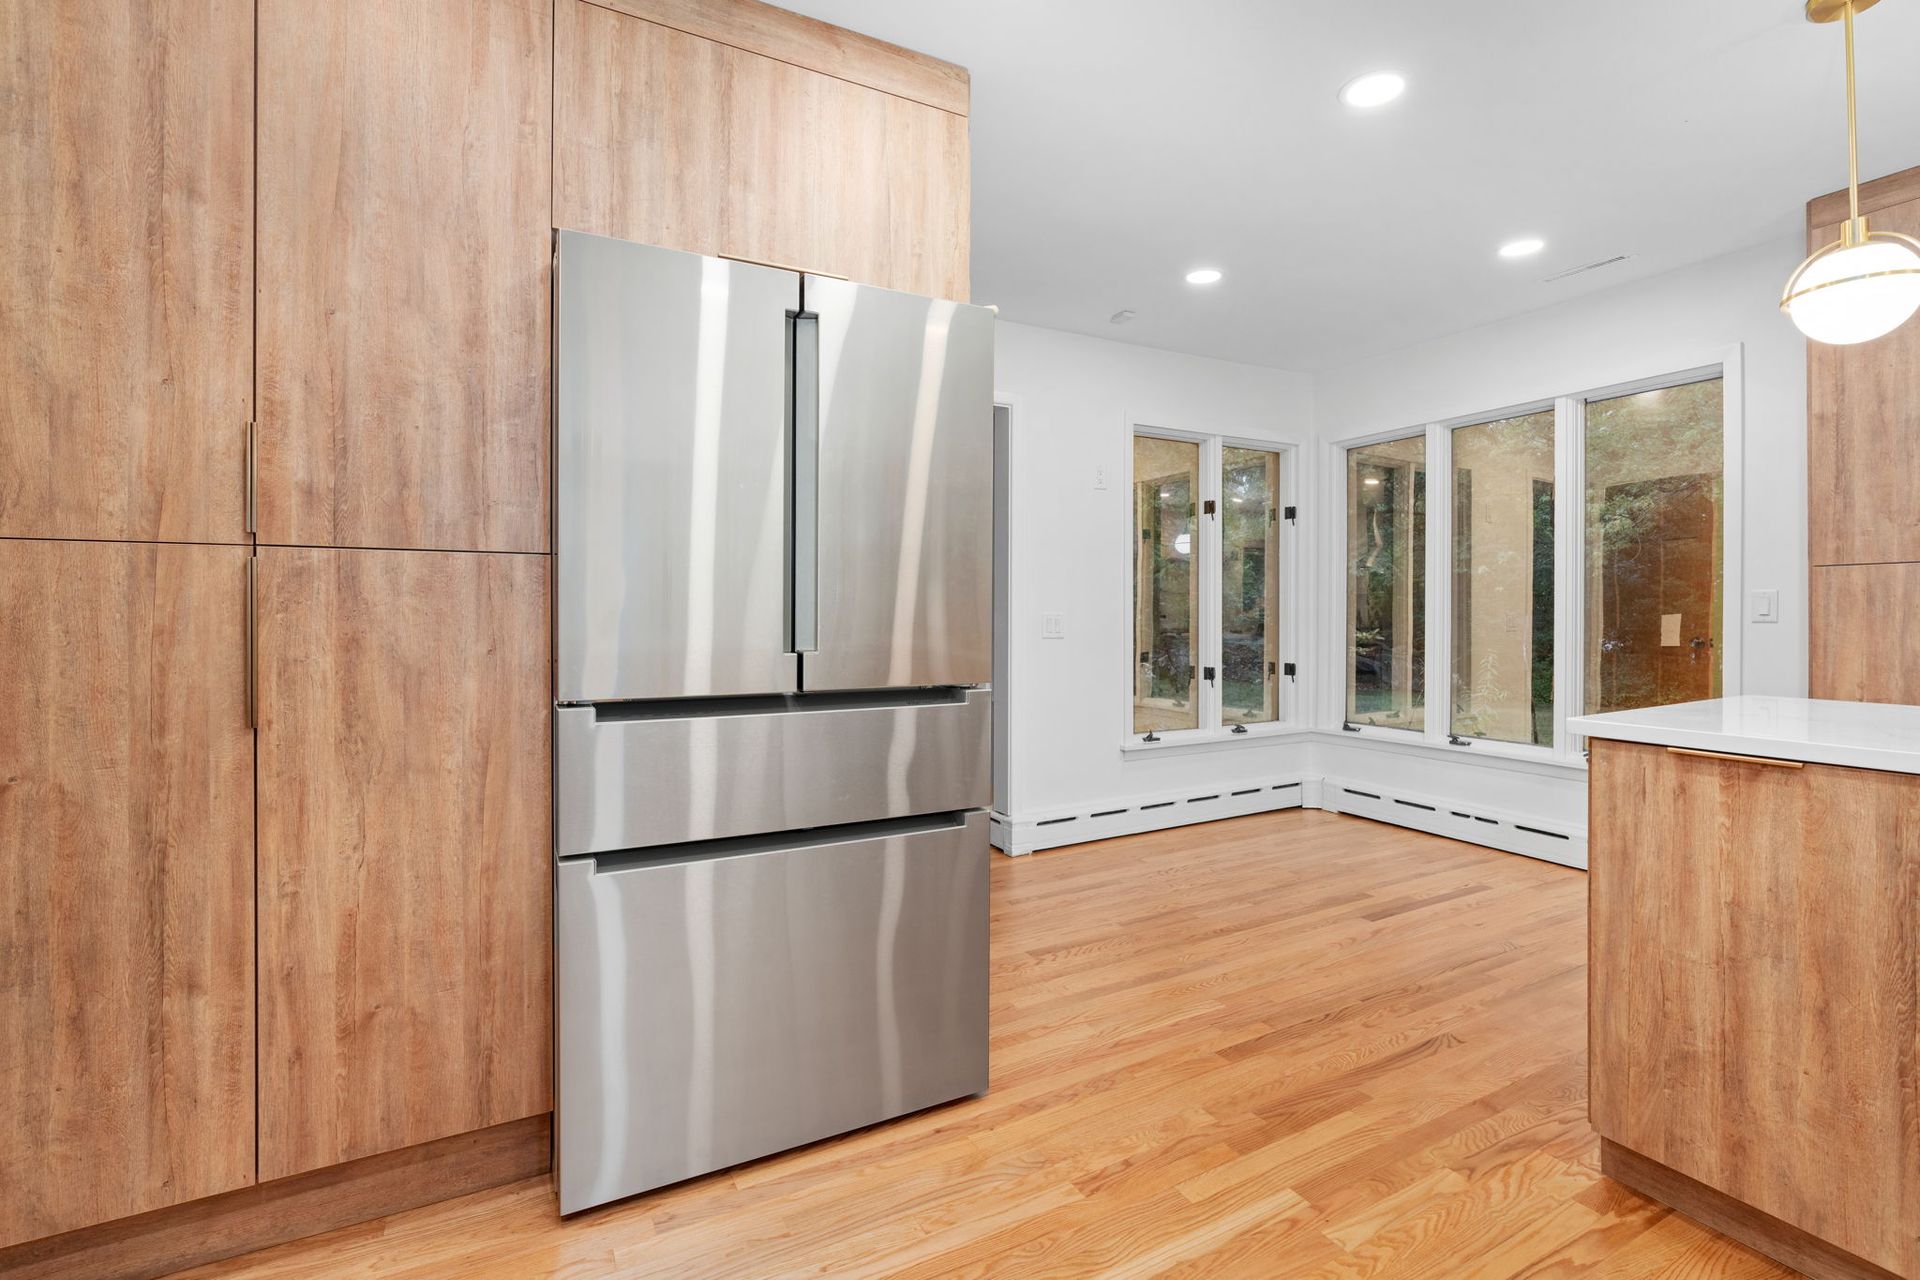 A kitchen with wooden cabinets and a stainless steel refrigerator.